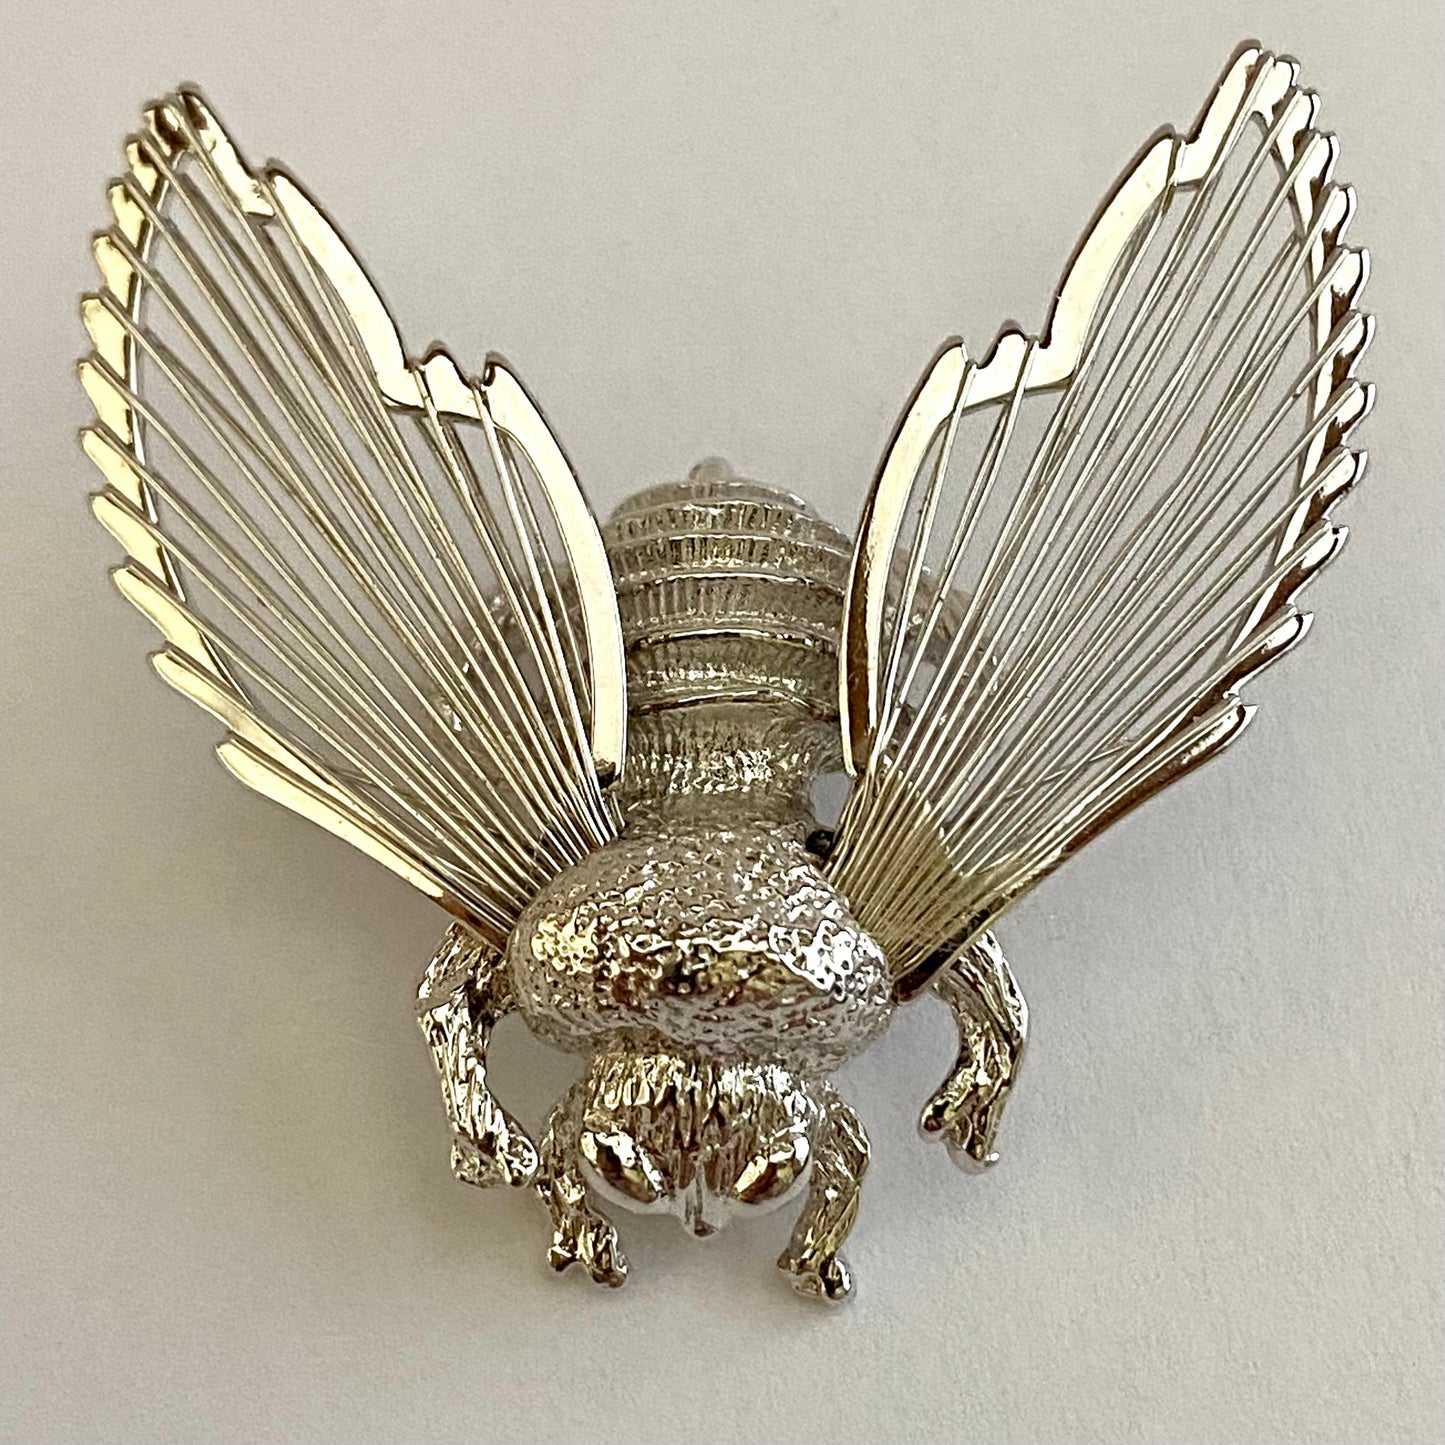 Late 60s/ Early 70s Monet Insect Brooch